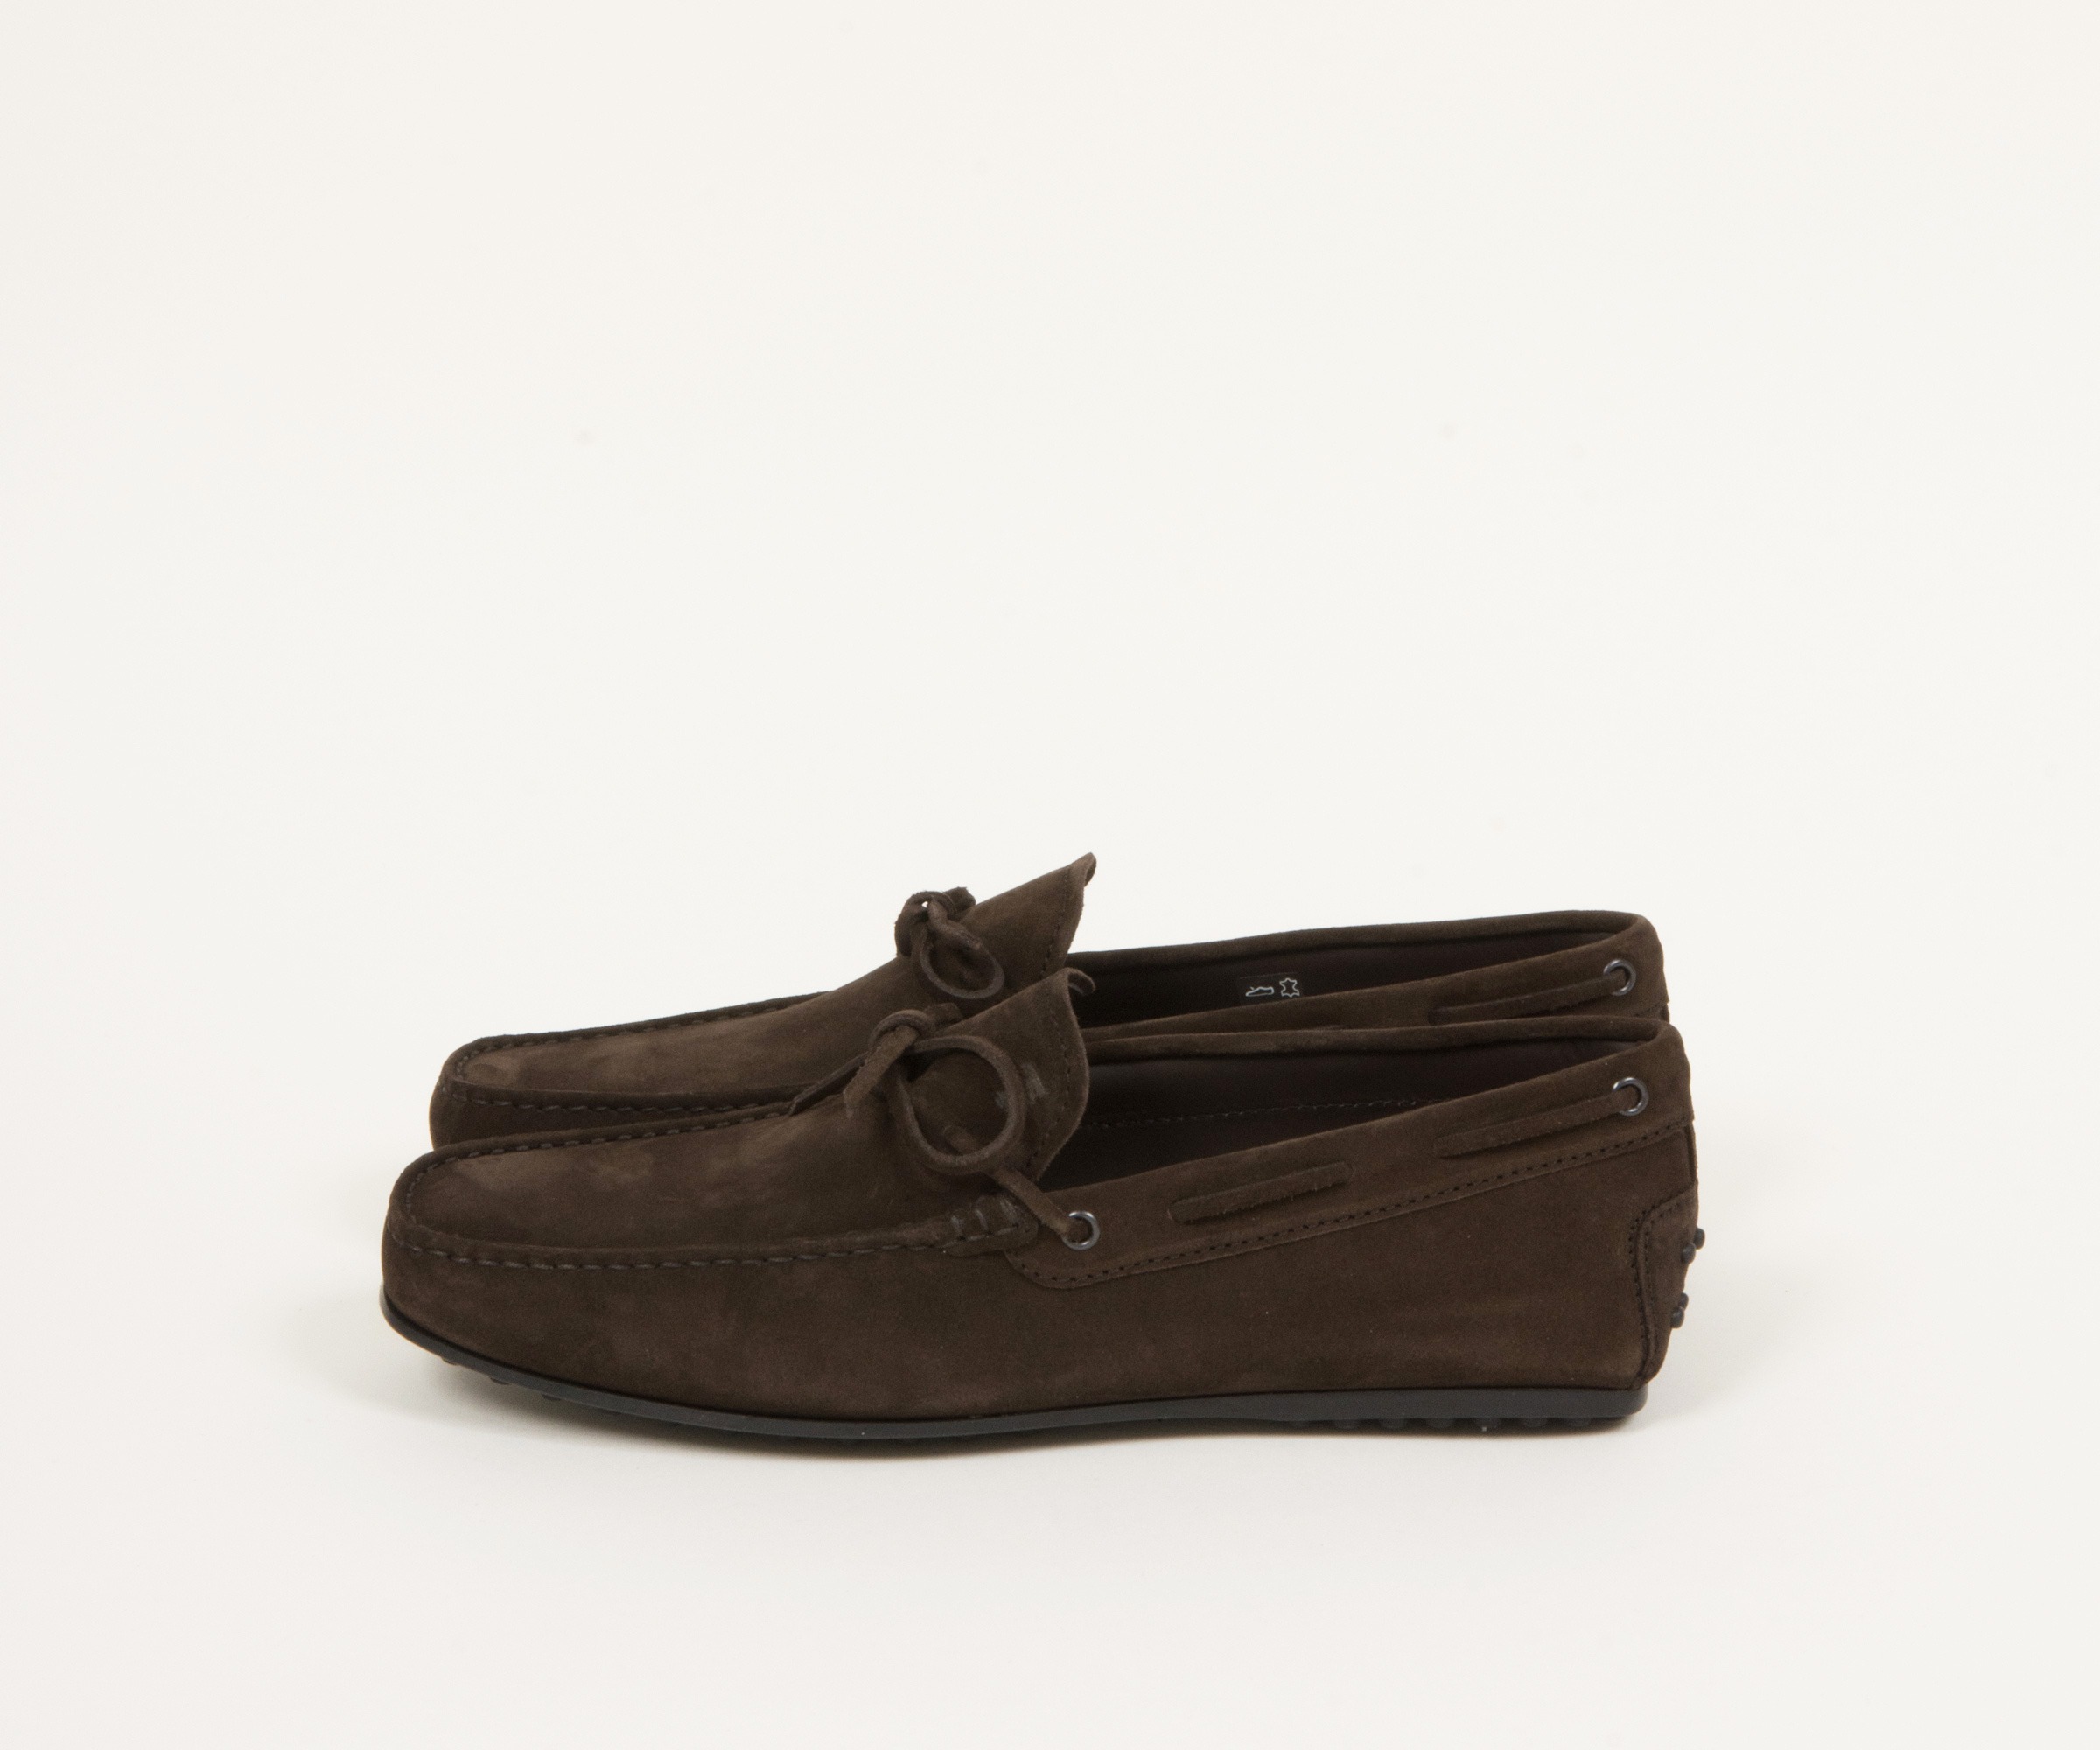 TODS City Gommino Suede Driving Shoes Dark Brown